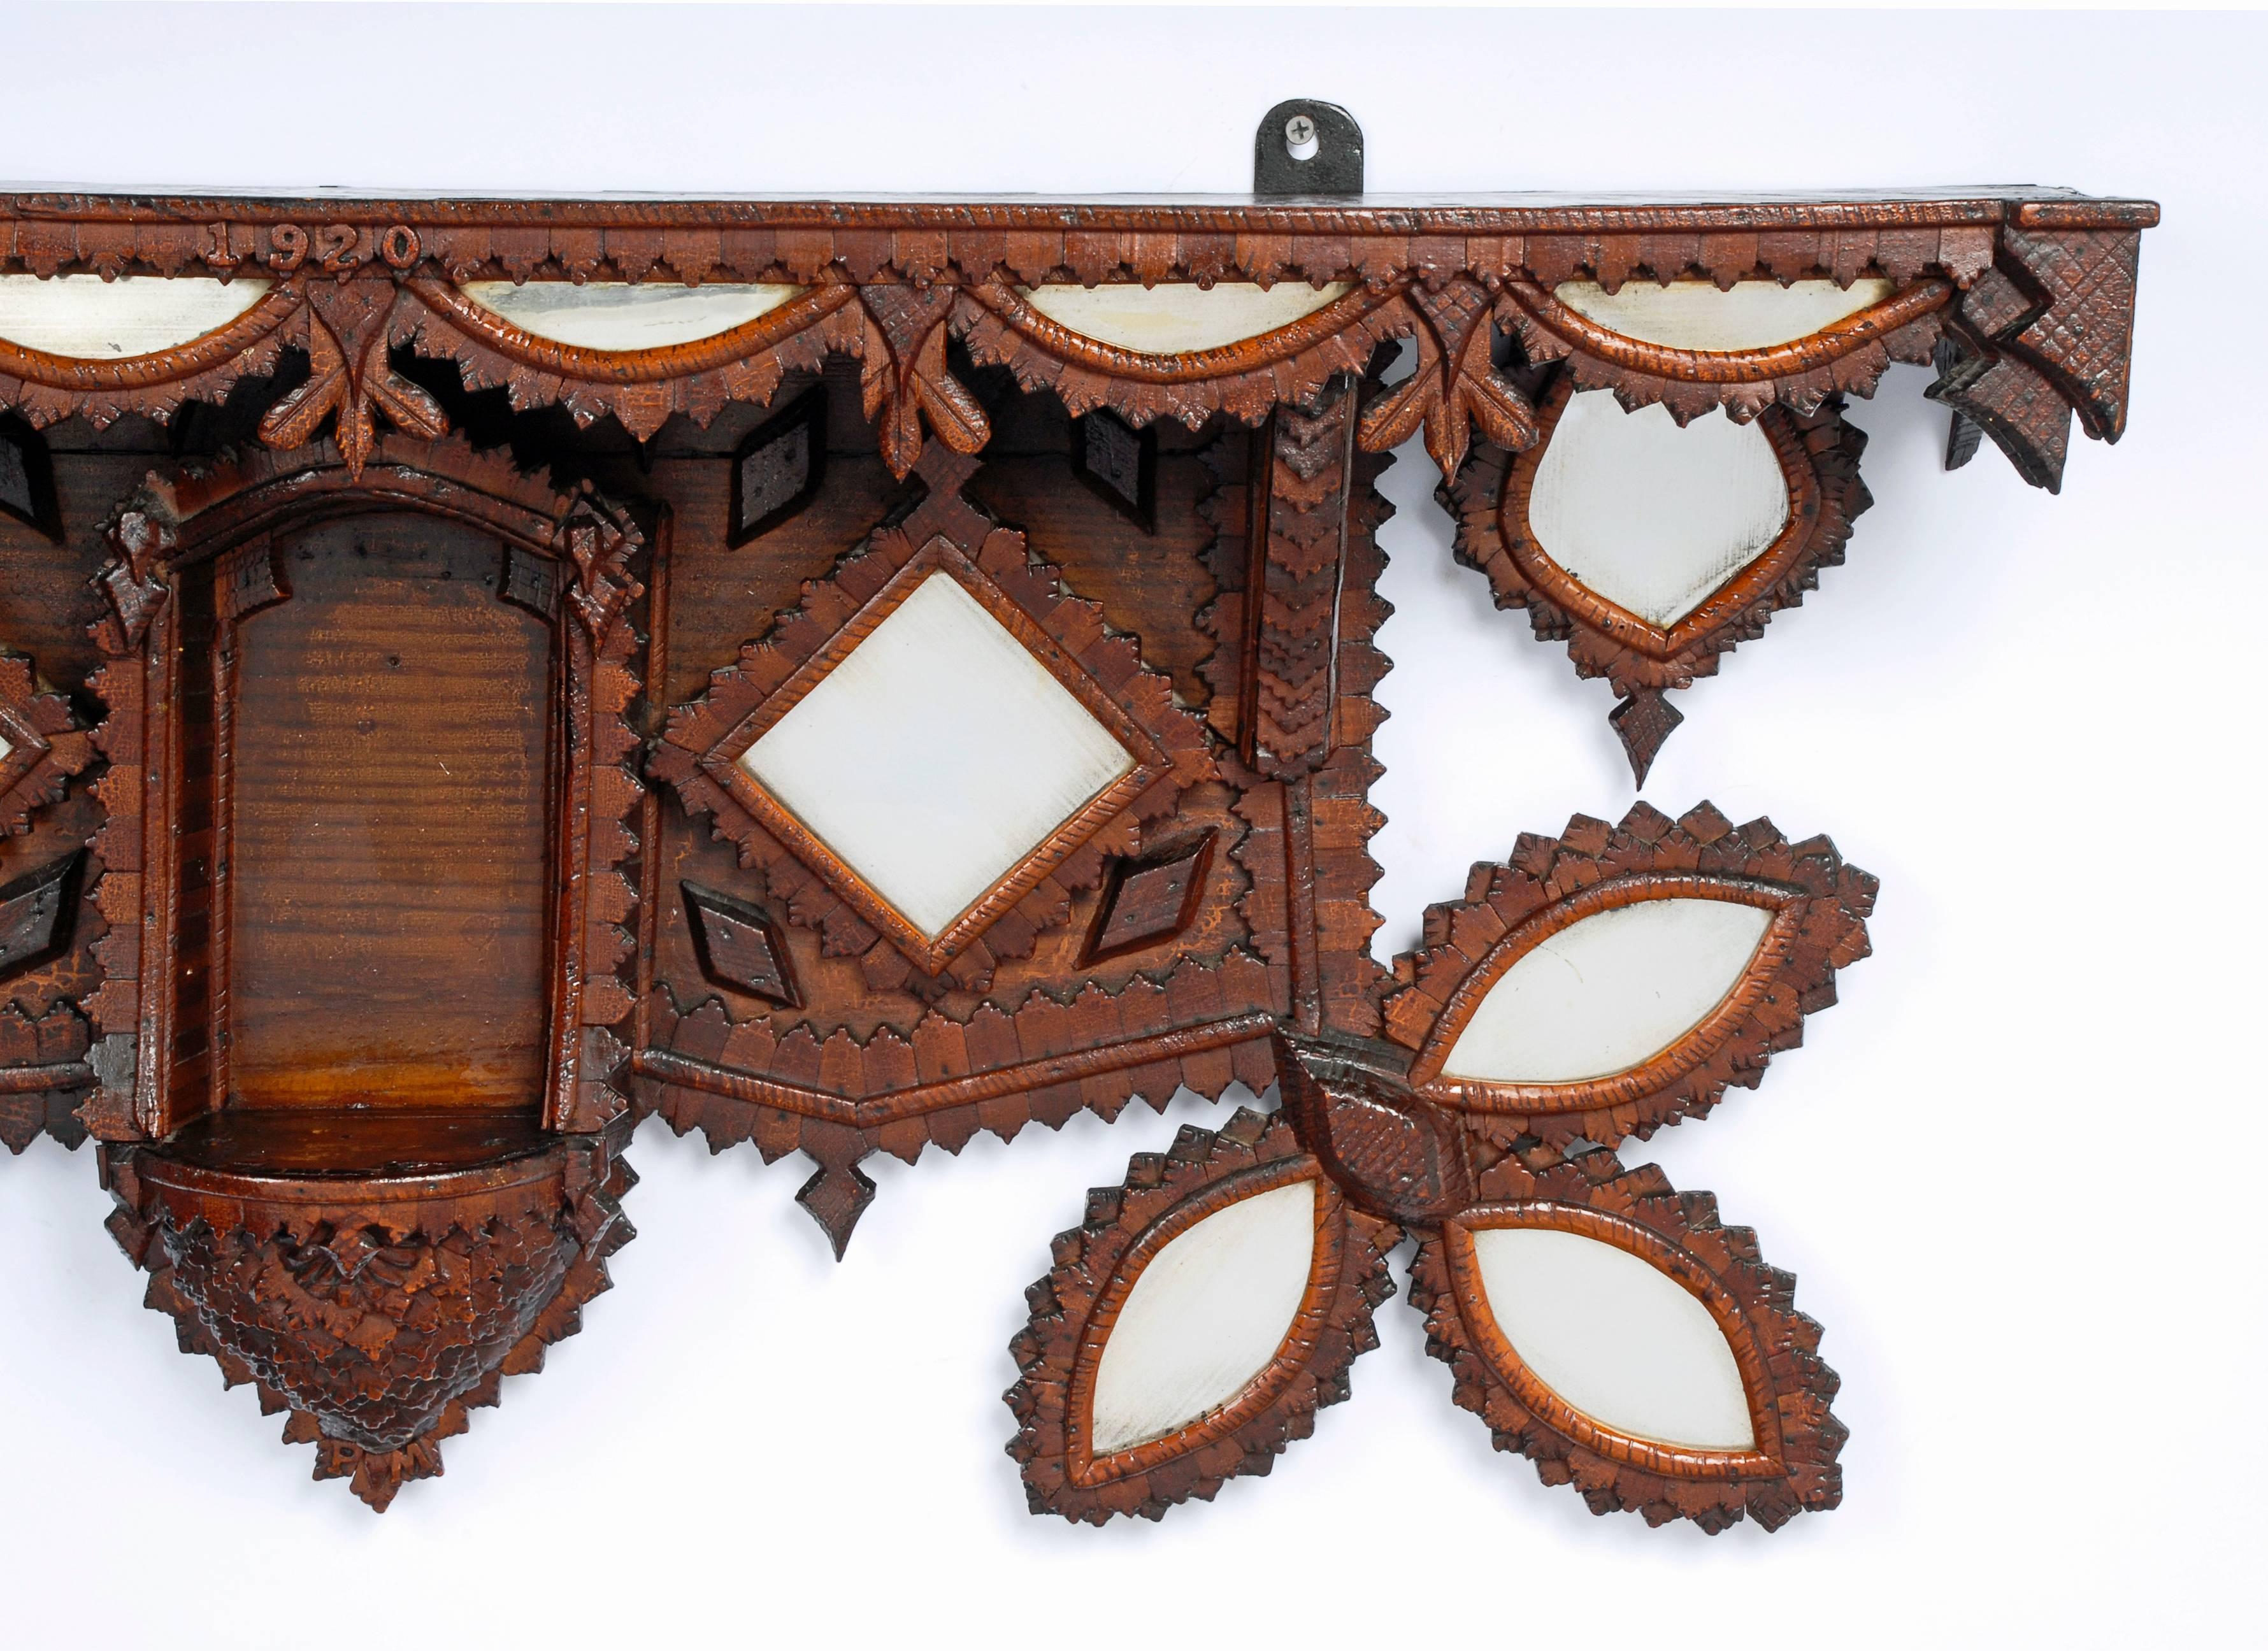 Superb Tramp Art Shelf with Inset Mirrors, 1920 In Excellent Condition For Sale In Manalapan, NJ